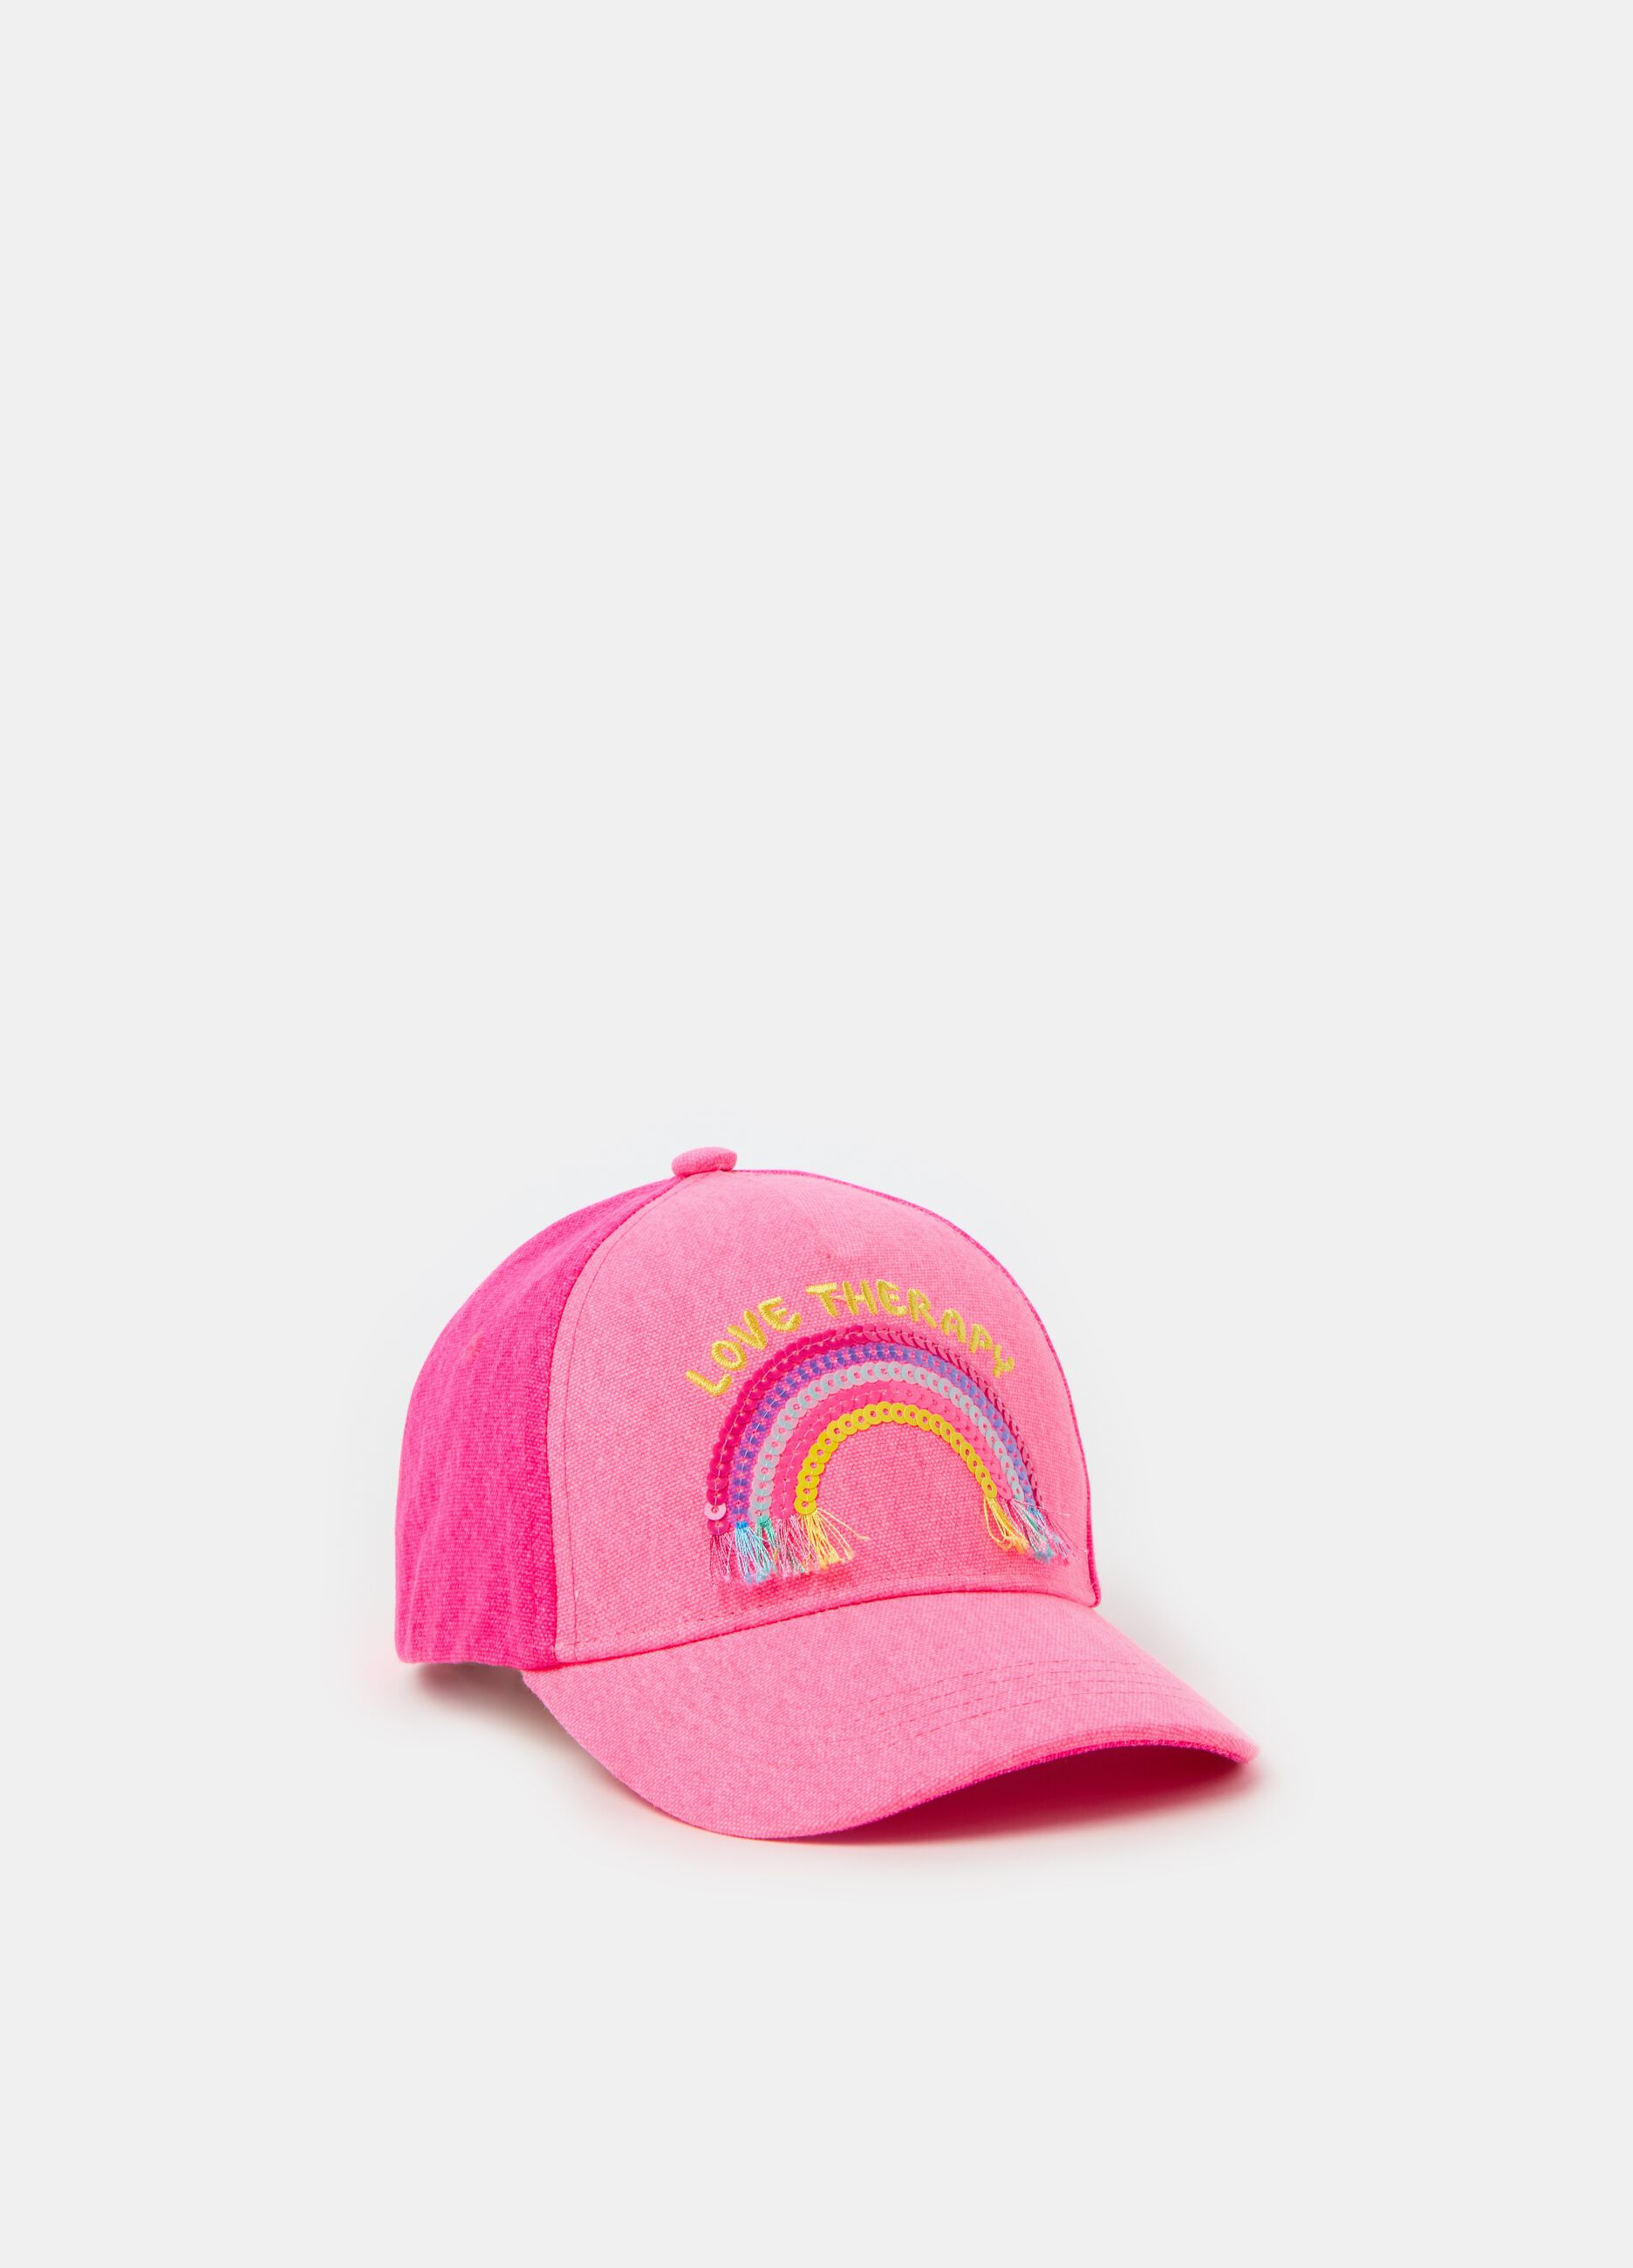 Baseball cap with sequins